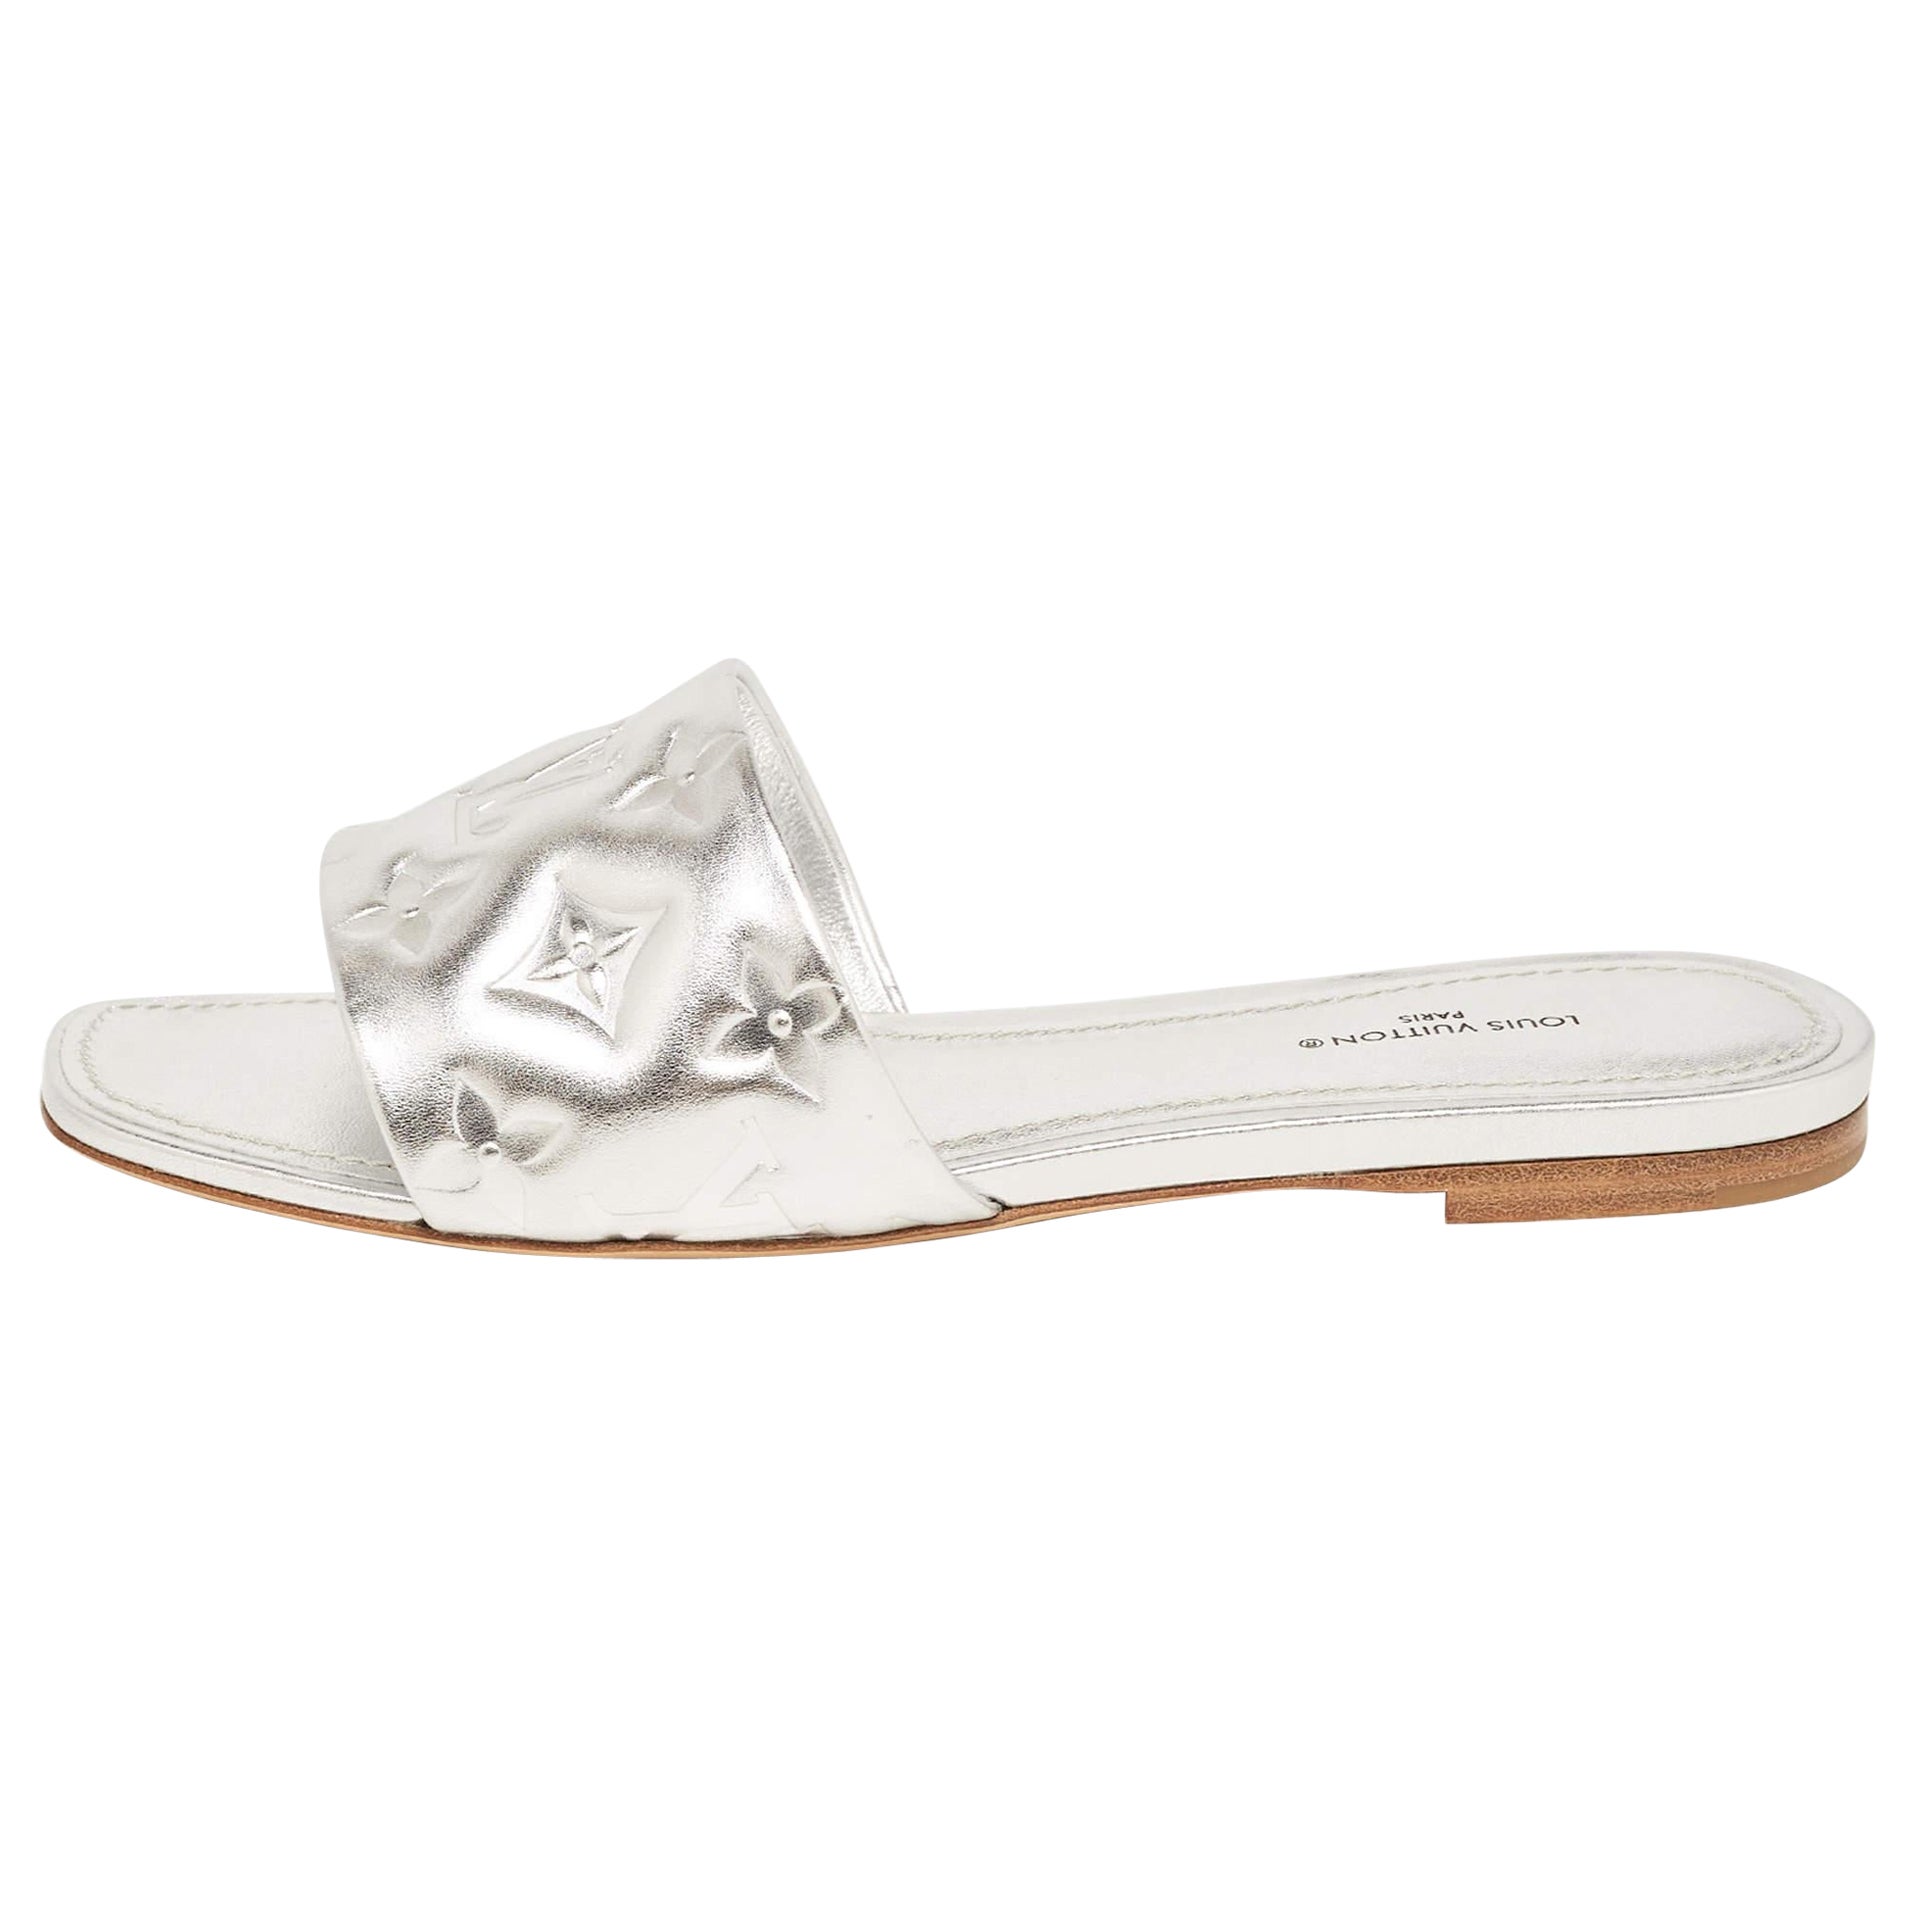 Enhance your casual looks with a touch of high style with these designer slides.